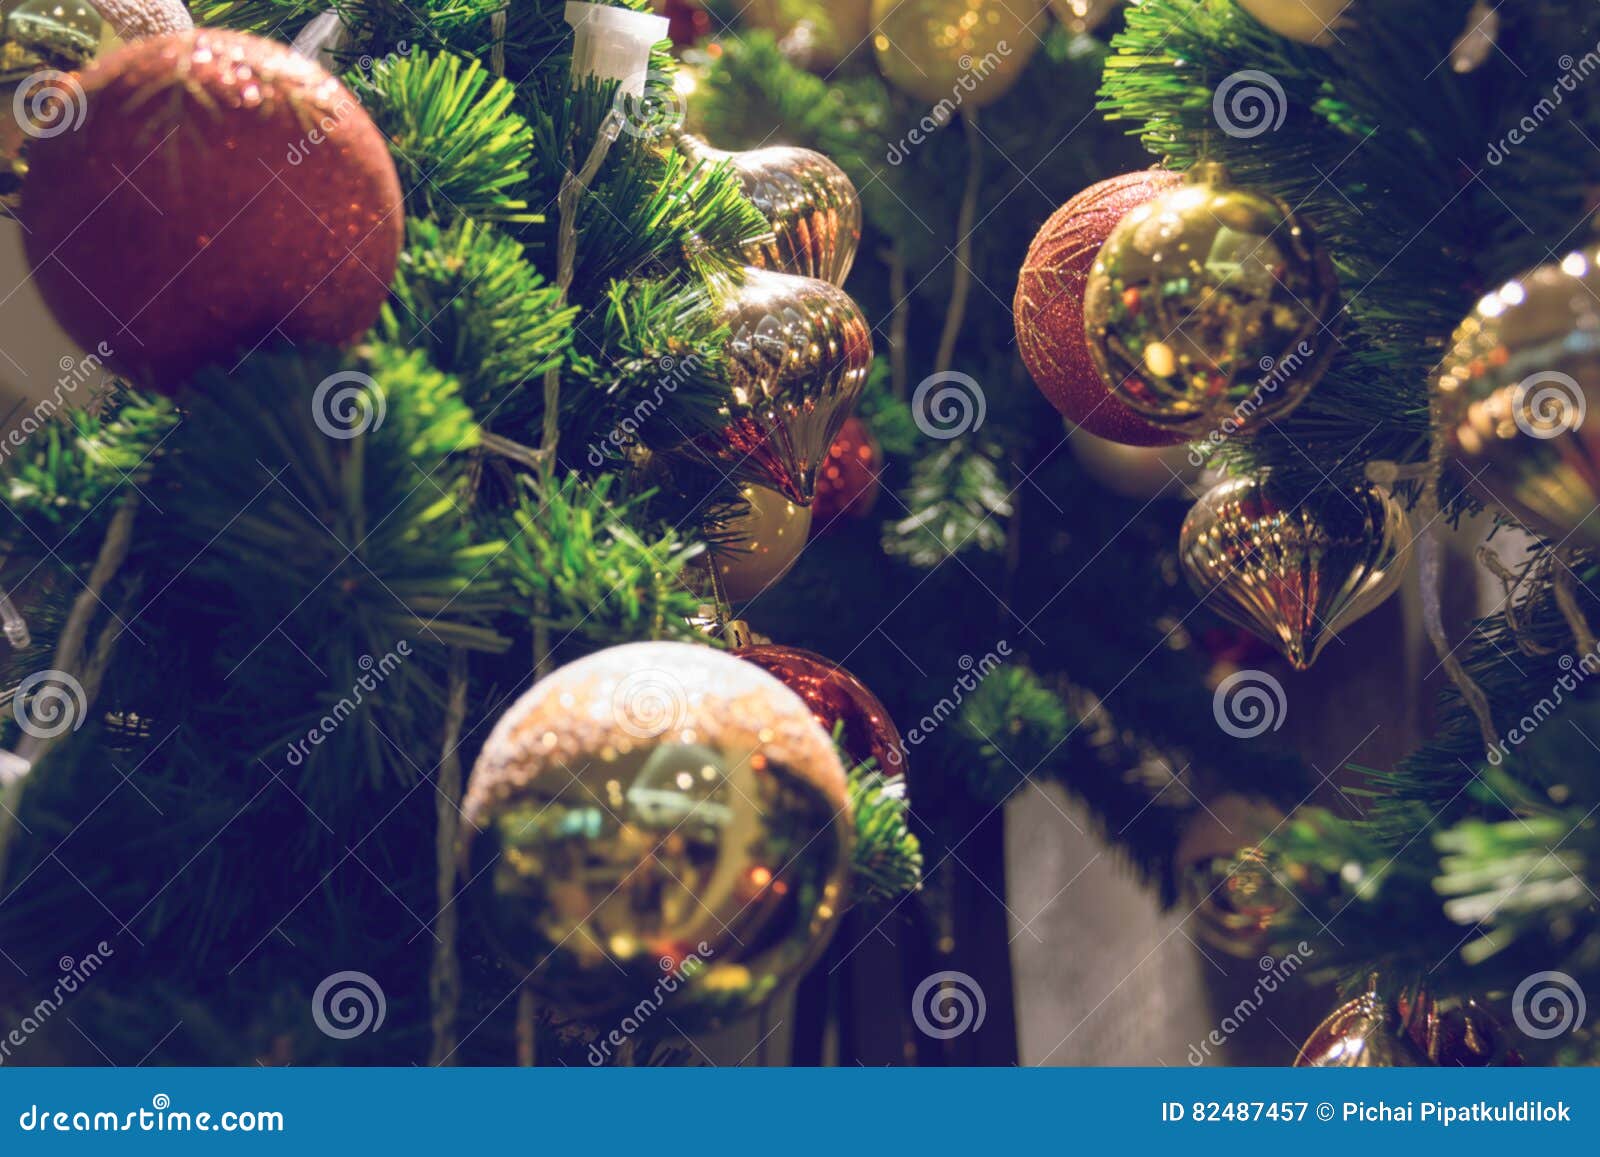 Bauble Hanging from a Decorated Christmas Tree. Stock Image - Image of ...